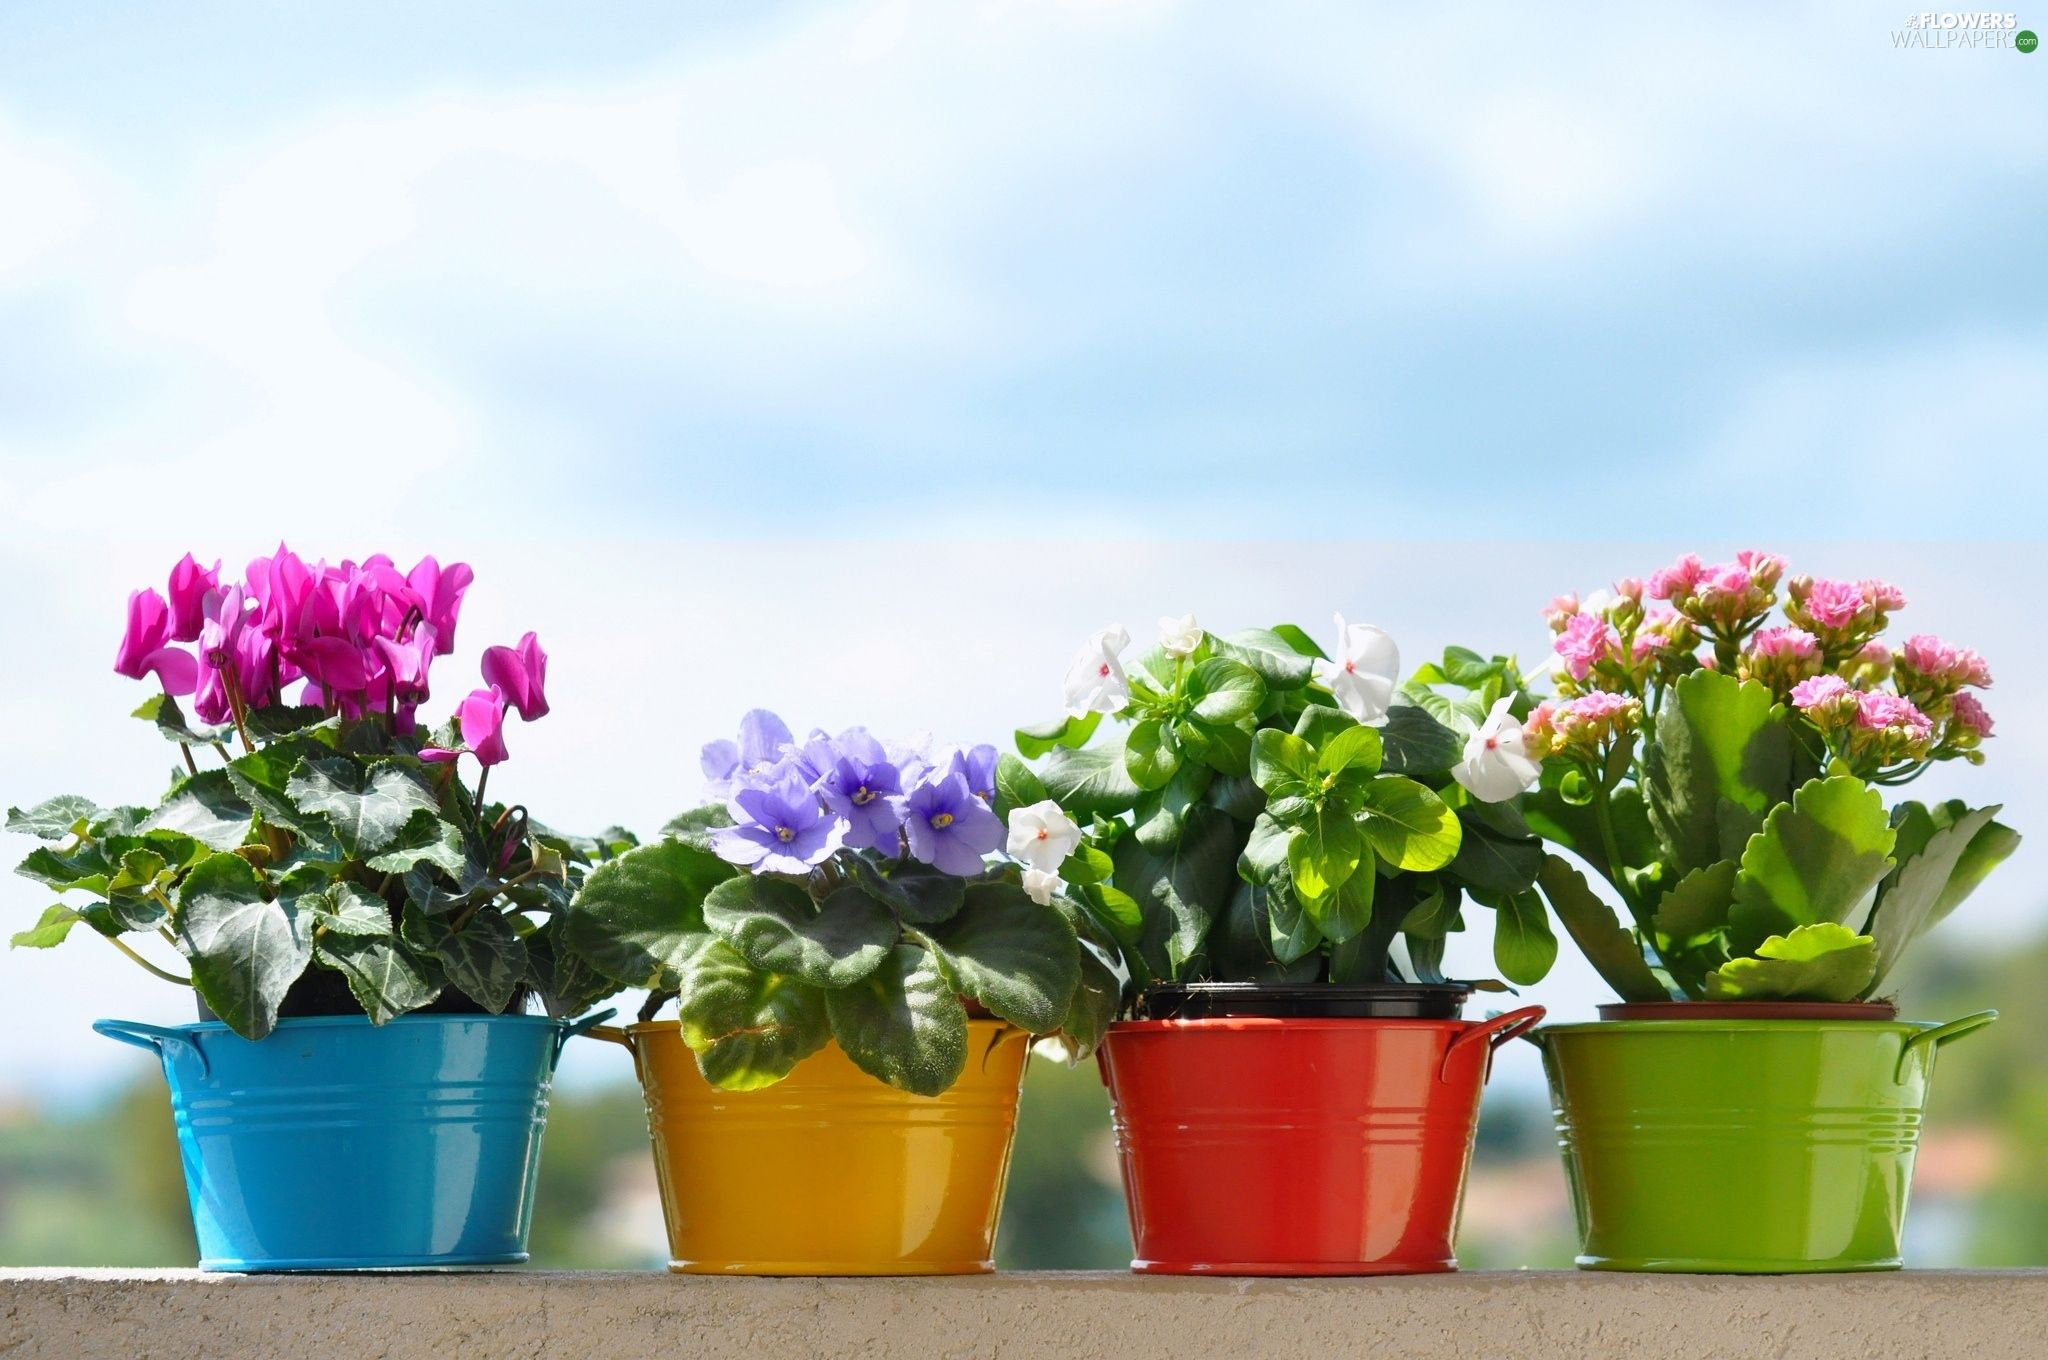 Potted Flowers Wallpaper Free Potted Flowers Background